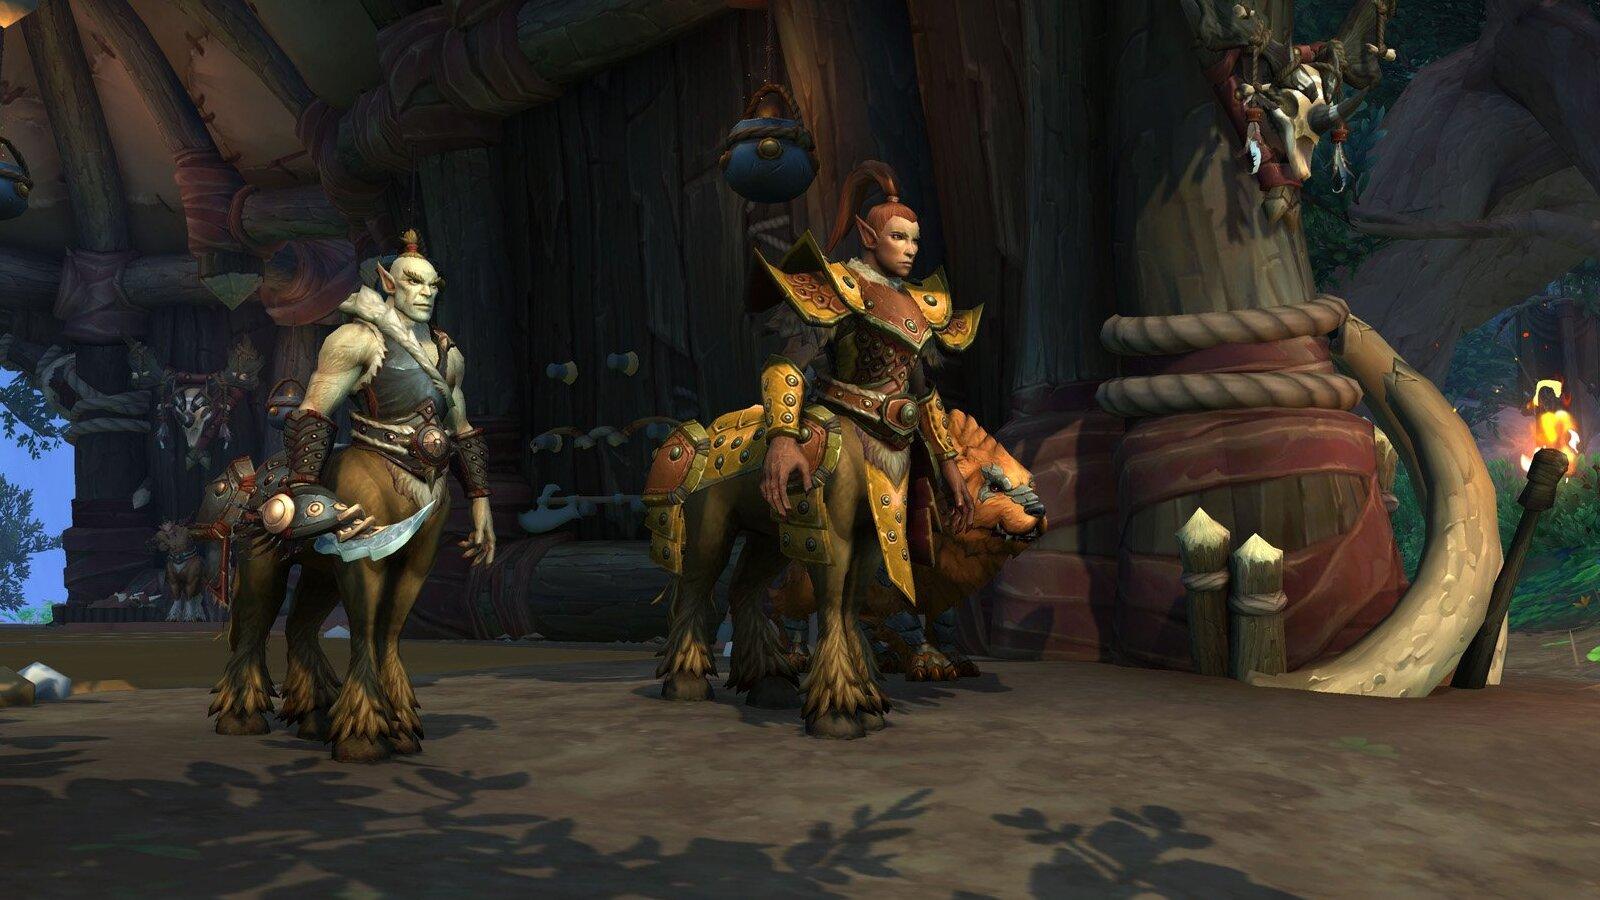 Centaurs stand watch in World of Warcraft (leaked WoW expansion story)